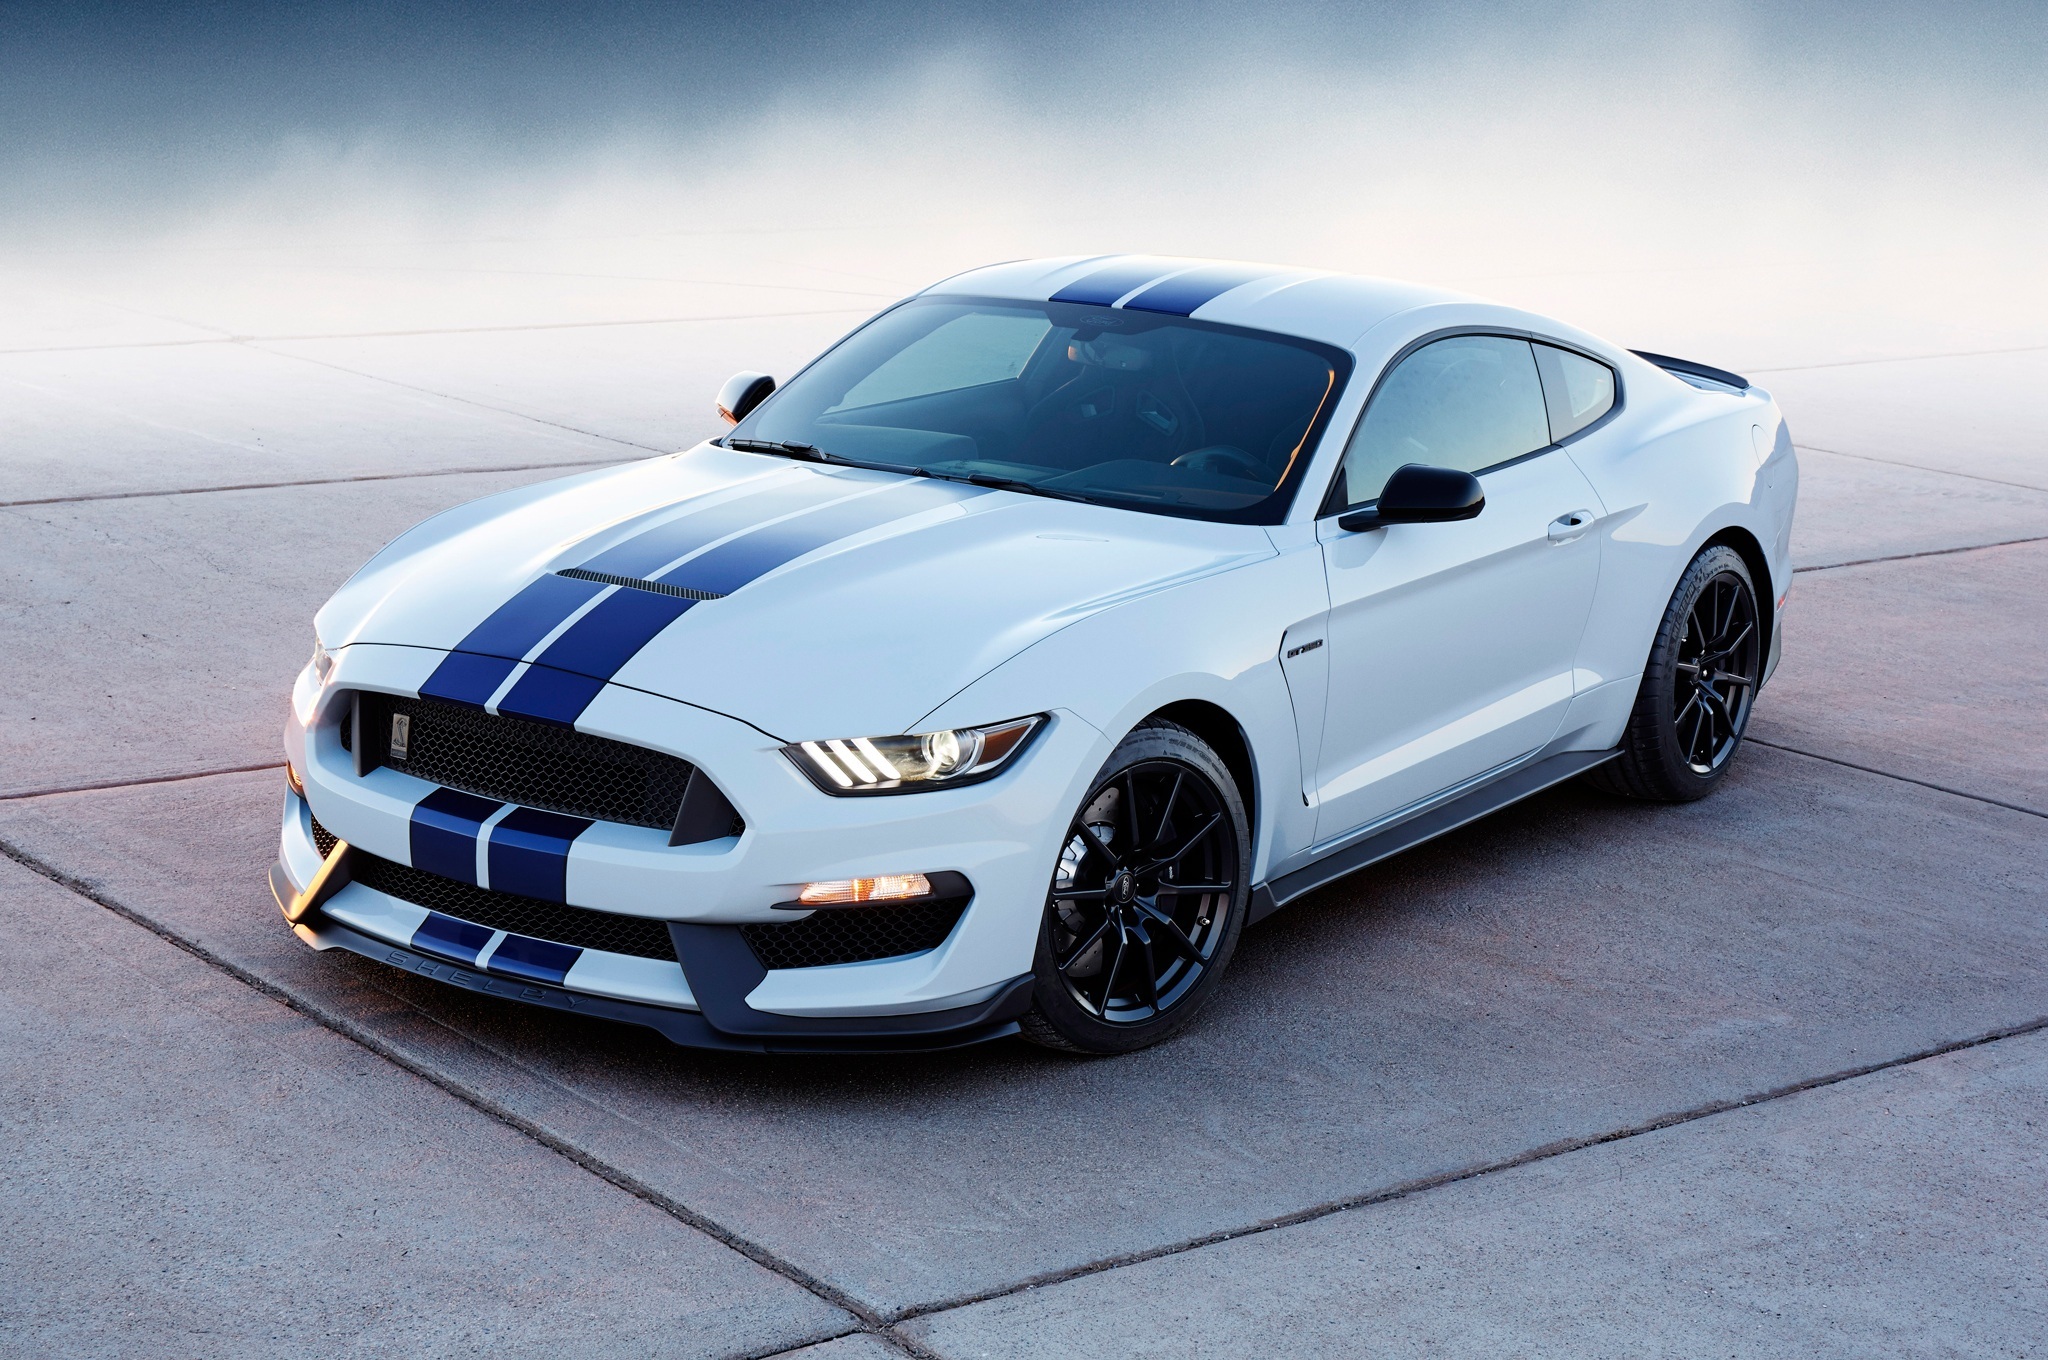 White with Blue Stripes, Ford Mustang Shelby GT350 by Vlad Sorodoc